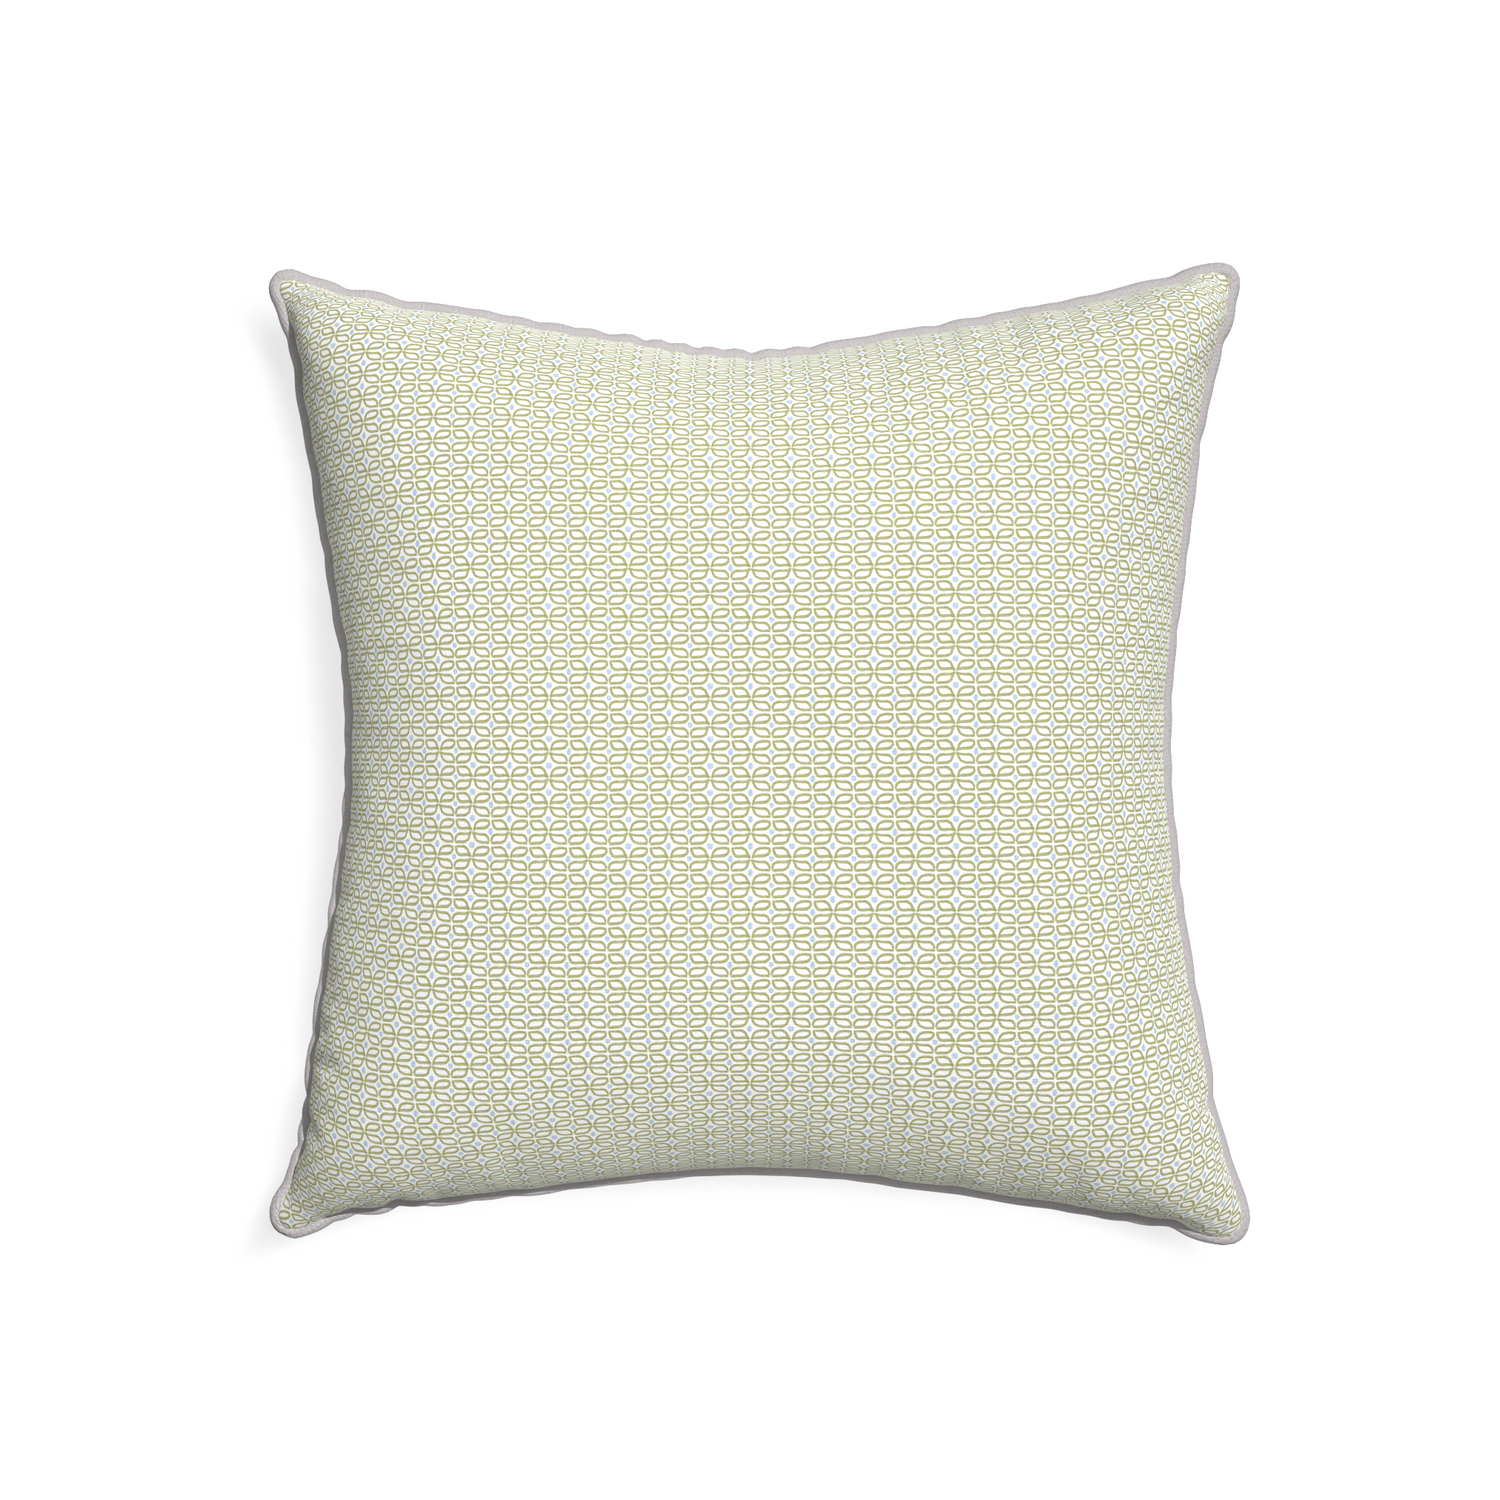 22-square loomi moss custom moss green geometricpillow with pebble piping on white background